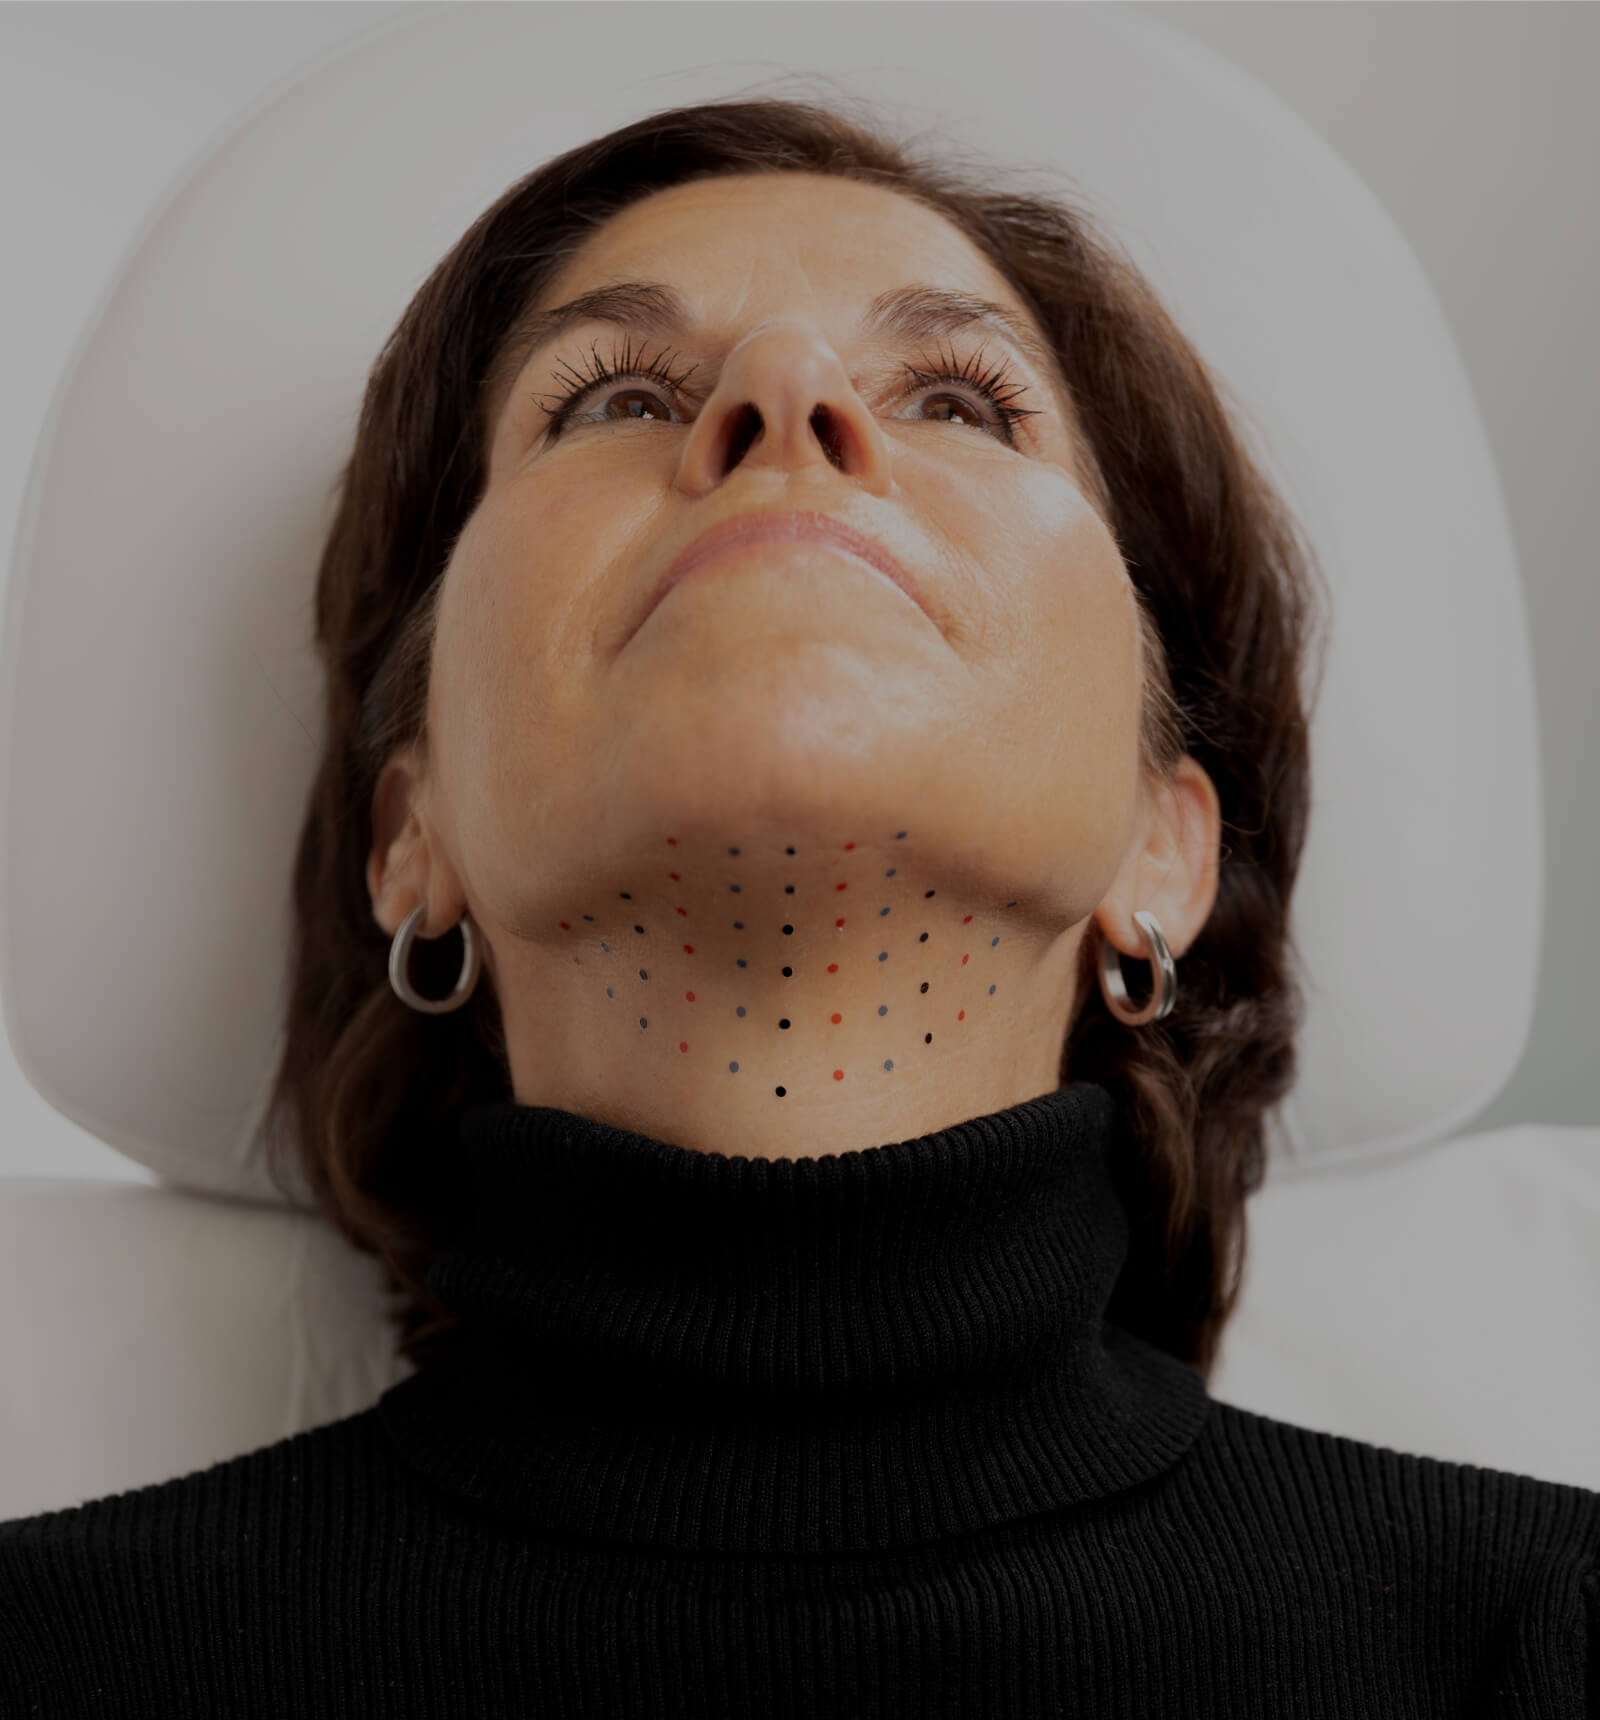 A patient from Clinique Chloé, chin up, showing the grid used on the chin during a Belkyra injection treatment